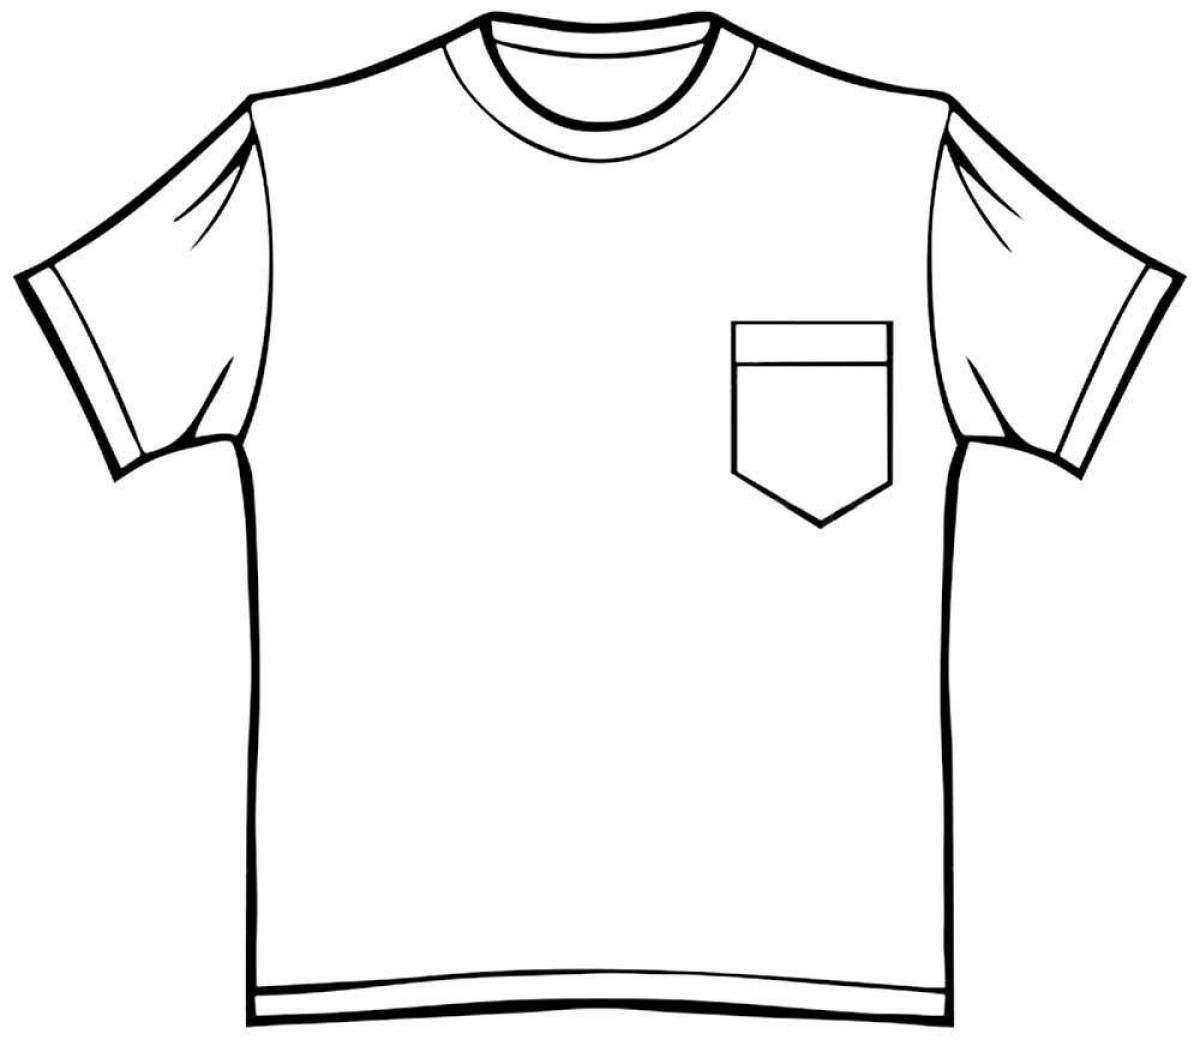 Cute boy t-shirt coloring page